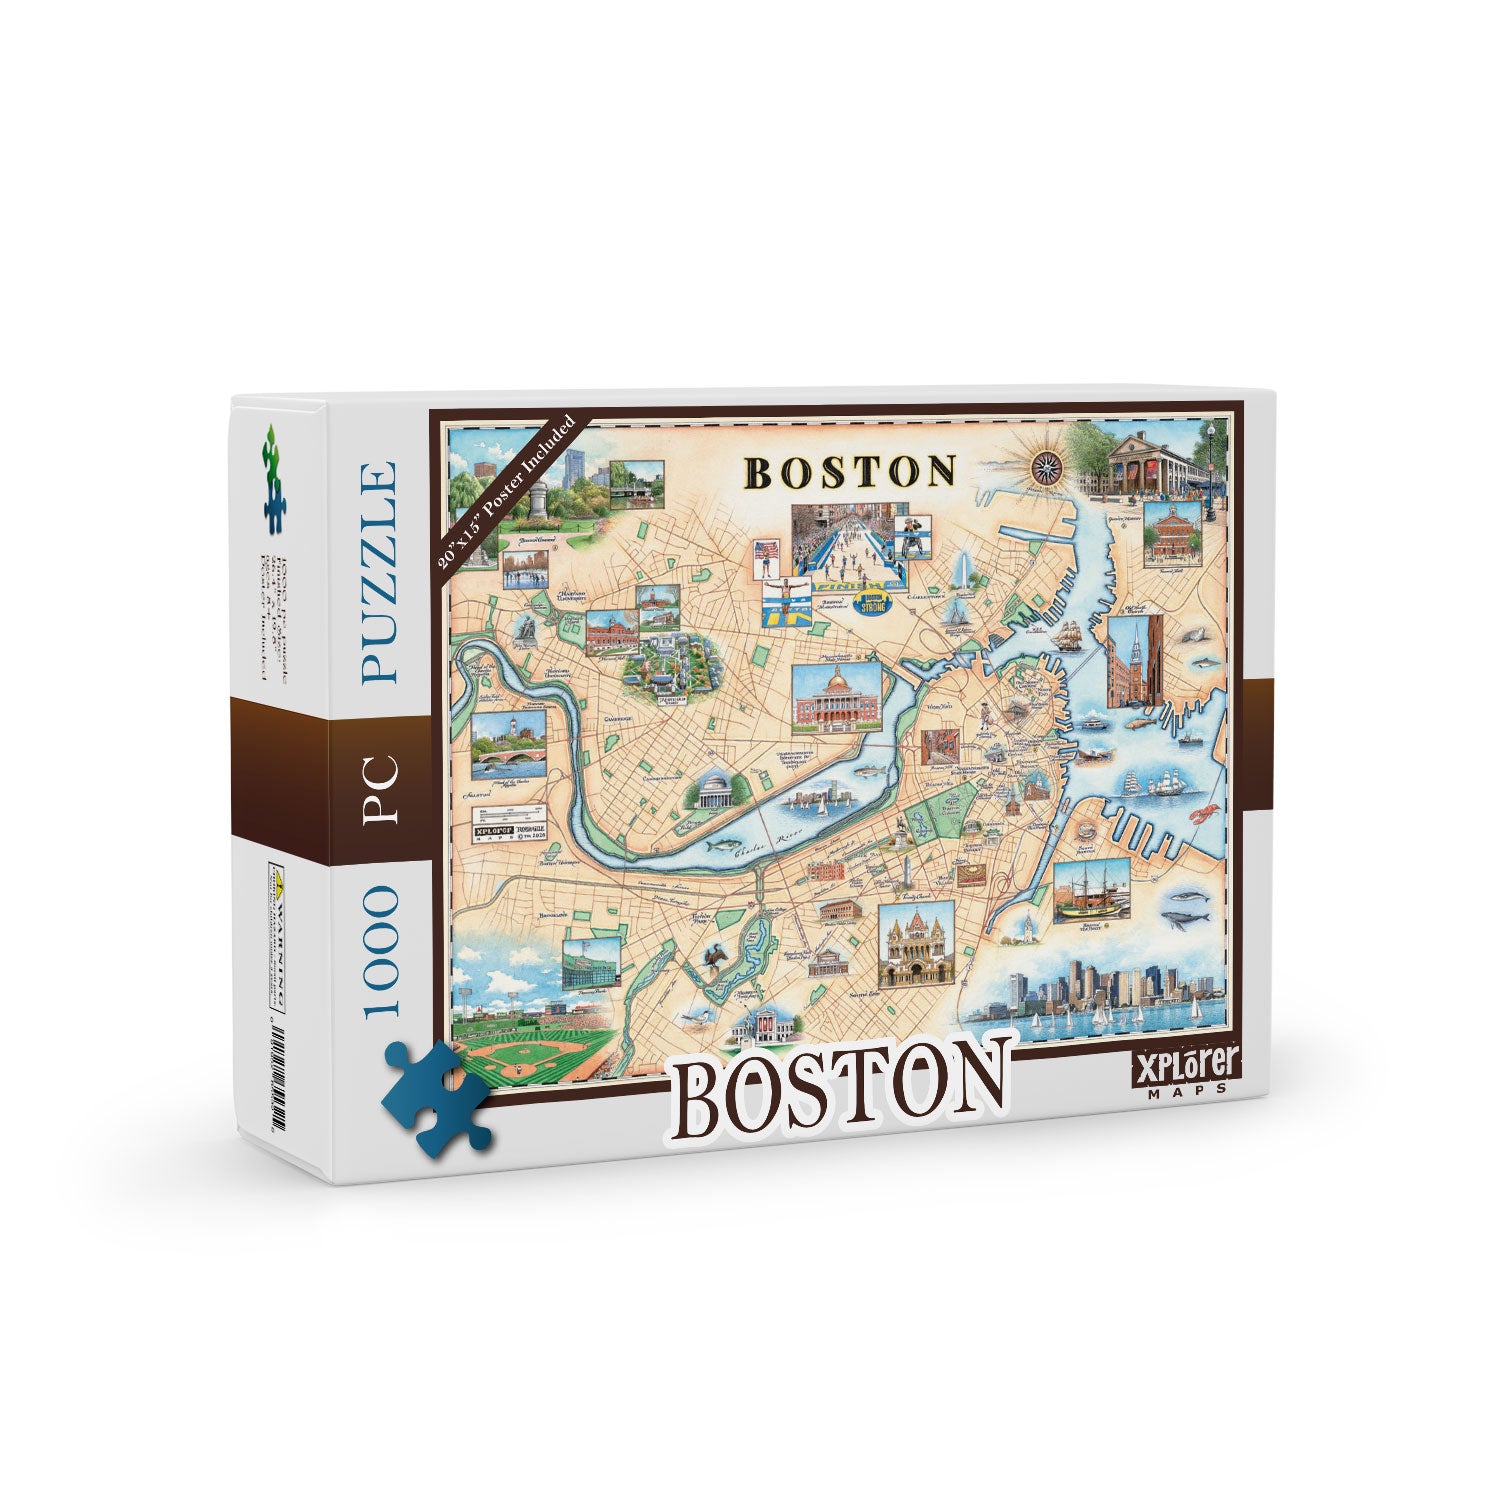 Hand-drawn Boston city Map 1000-piece puzzle. Boston city map features the Trinity Church, Quincy Market, Fenway Park, and Harvard Yard. There is also a featured illustration dedicated to the Boston Marathon. 